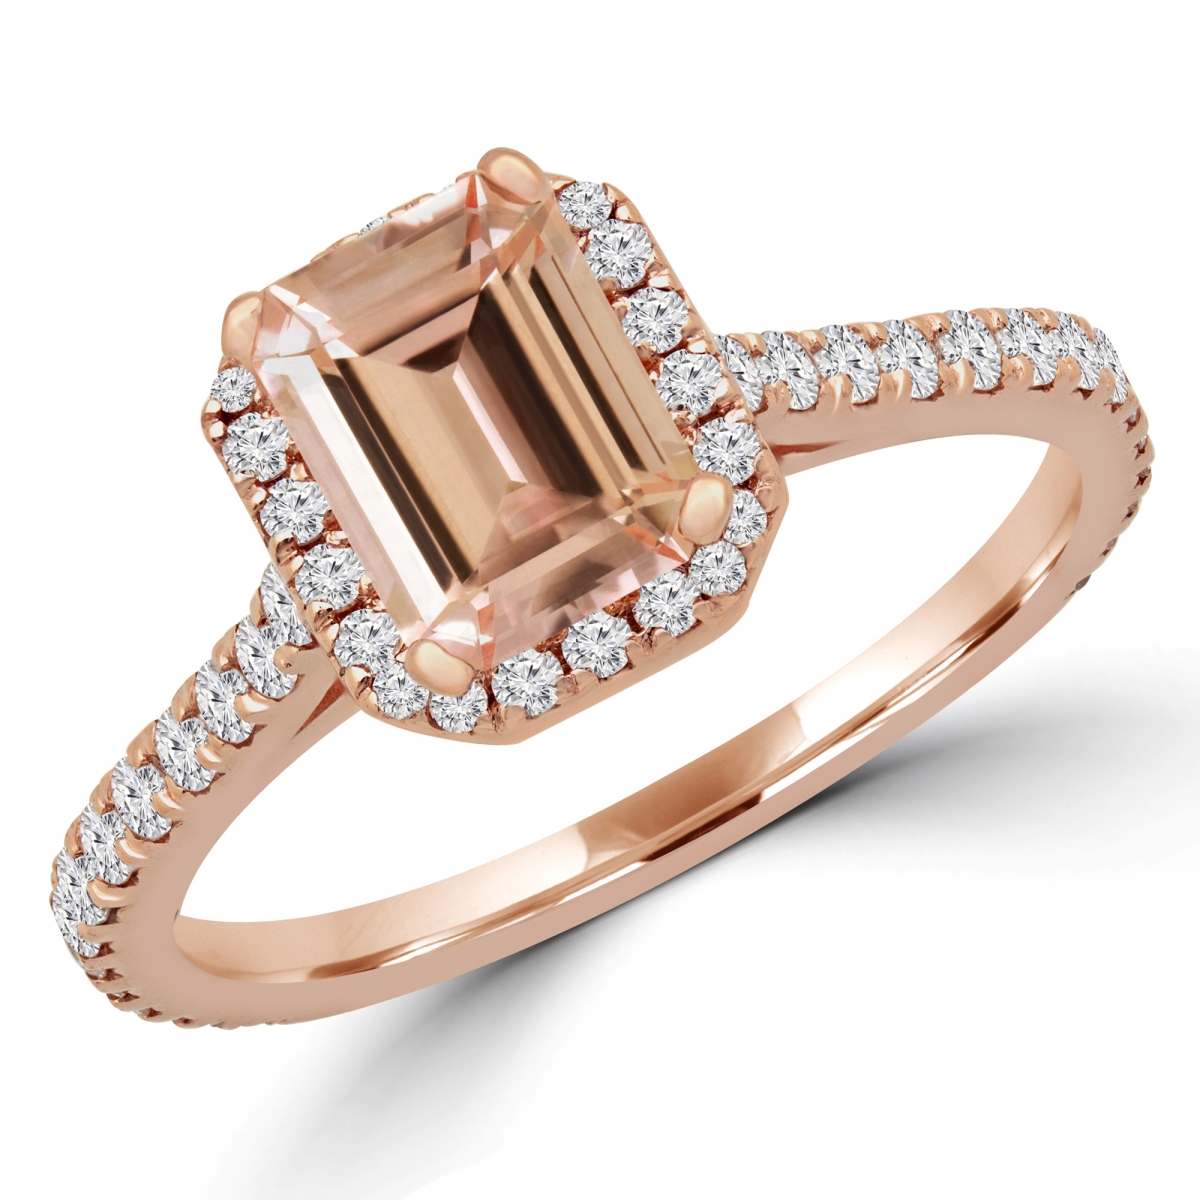 Picture of Majesty Diamonds MD180580-8.25 1.25 CTW Emerald Pink Morganite Halo Engagement Ring in 14K Rose Gold - Size 8.25